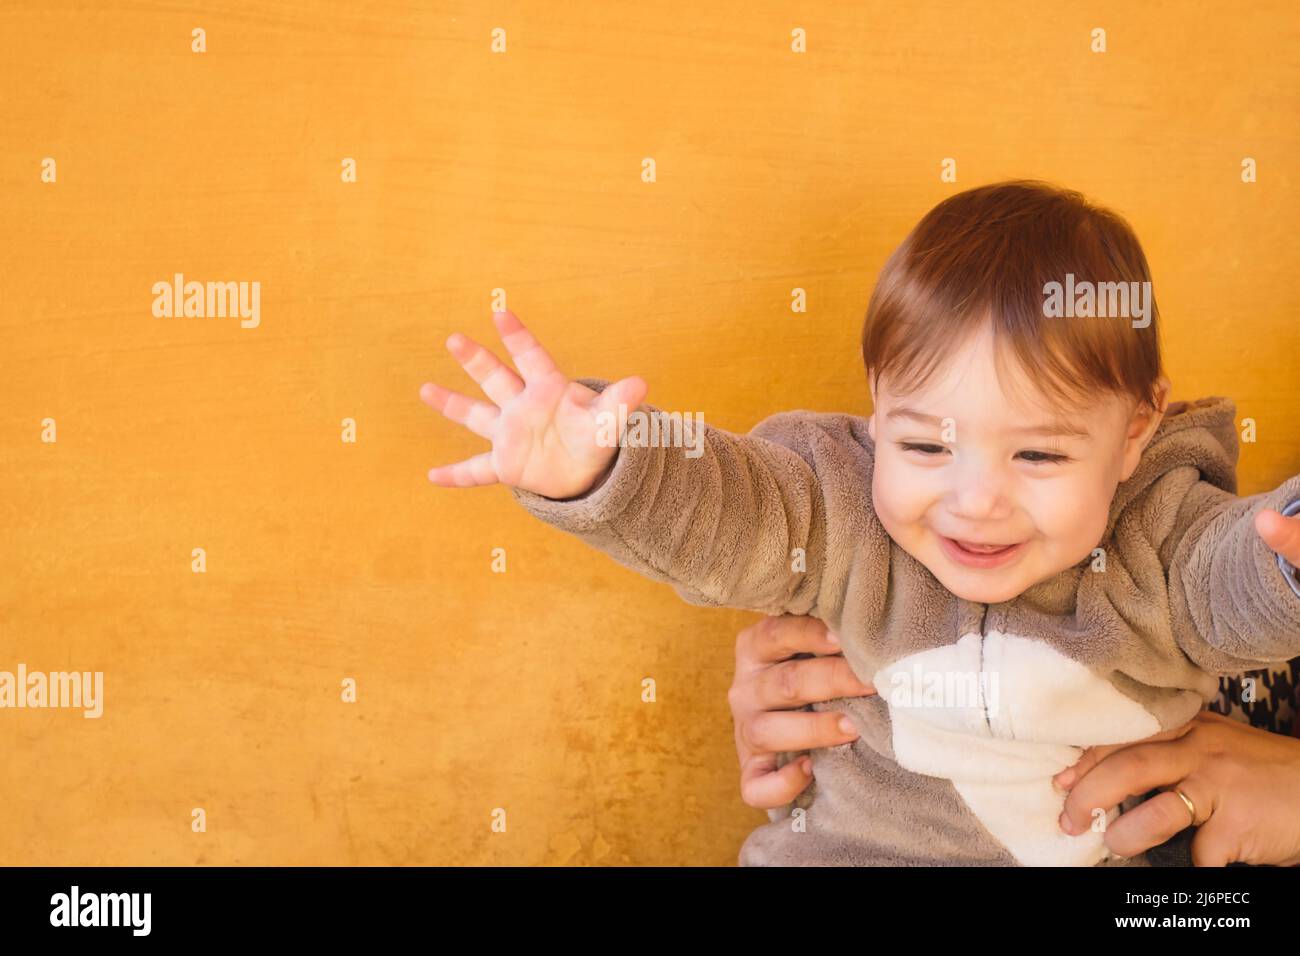 Adorable baby toddler boy wearing a warm winter onesie jumpsuit against a bright orange wall background Stock Photo